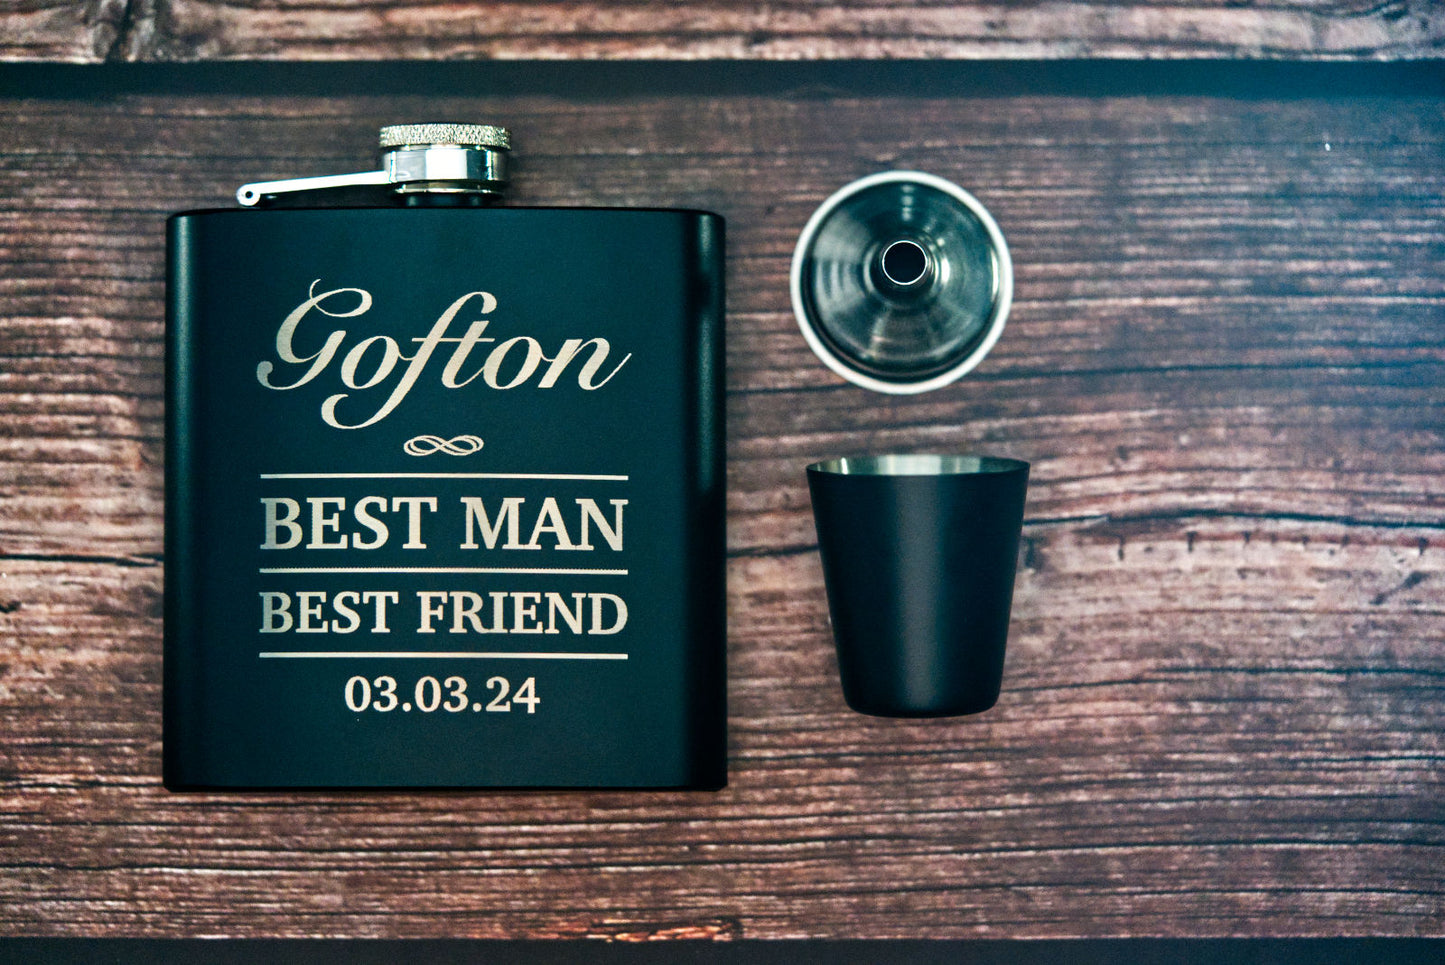 Best Man Hip Flask Gift Set Personalised with Engraved Name